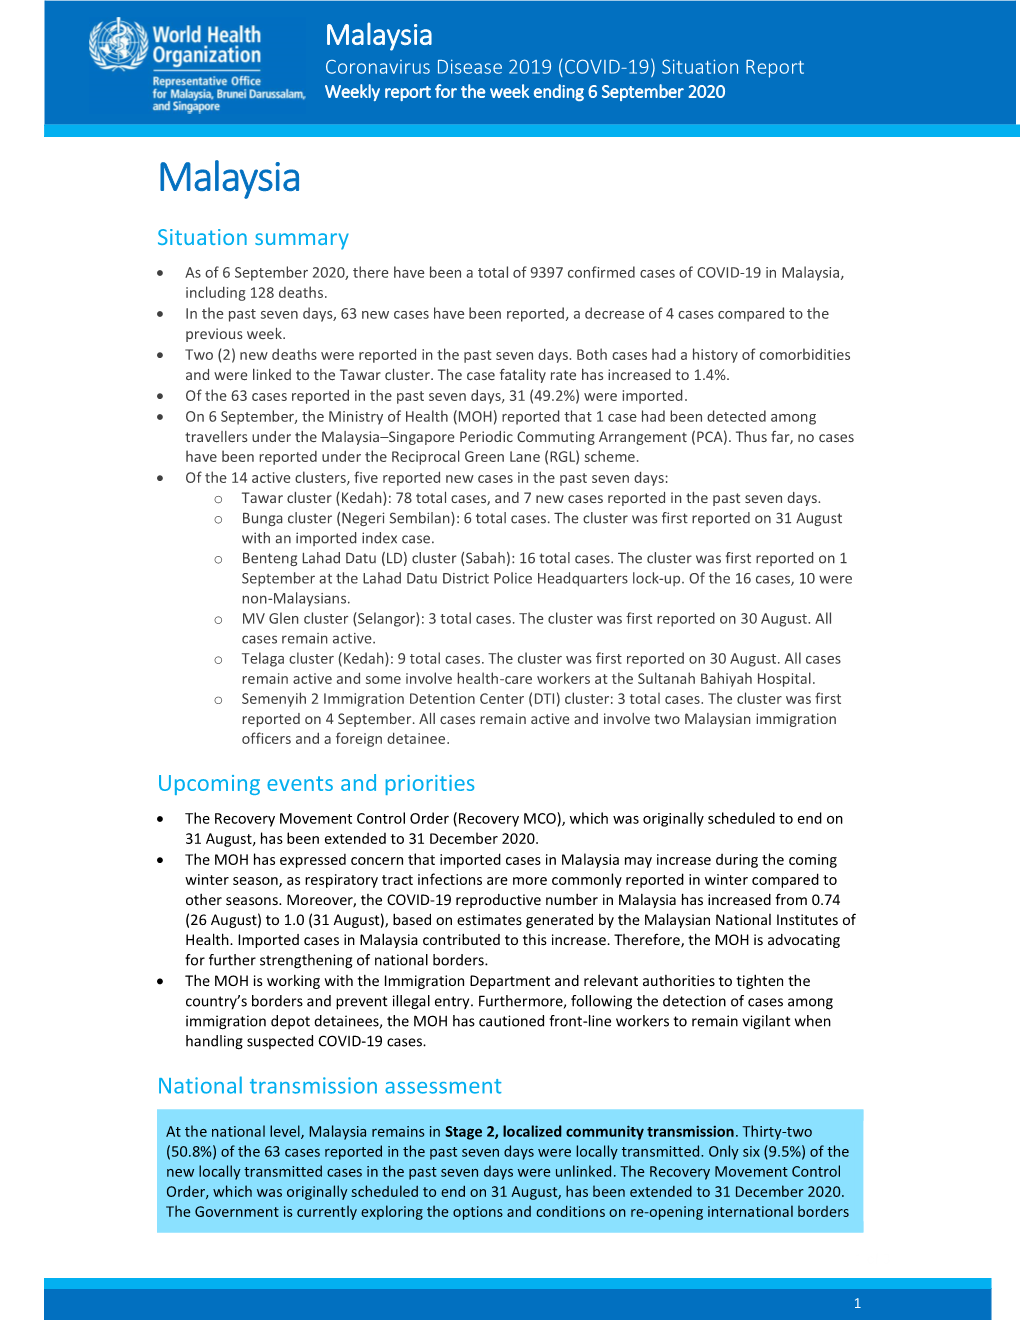 Malaysia Coronavirus Disease 2019 (COVID-19) Situation Report Weekly Report for the Week Ending 6 September 2020